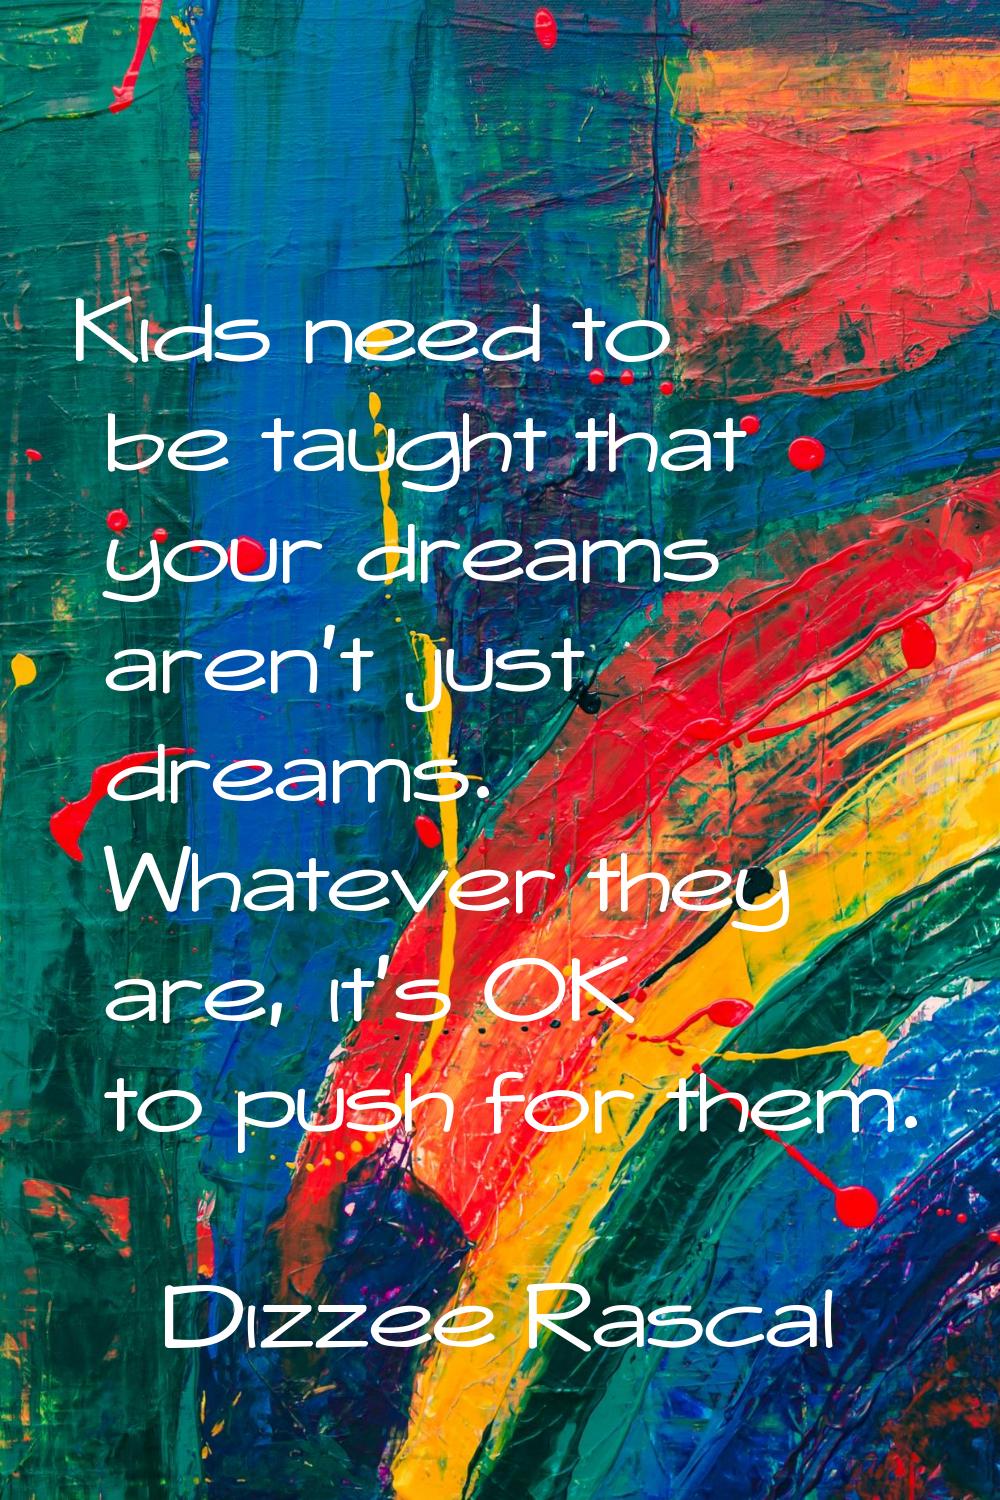 Kids need to be taught that your dreams aren't just dreams. Whatever they are, it's OK to push for 